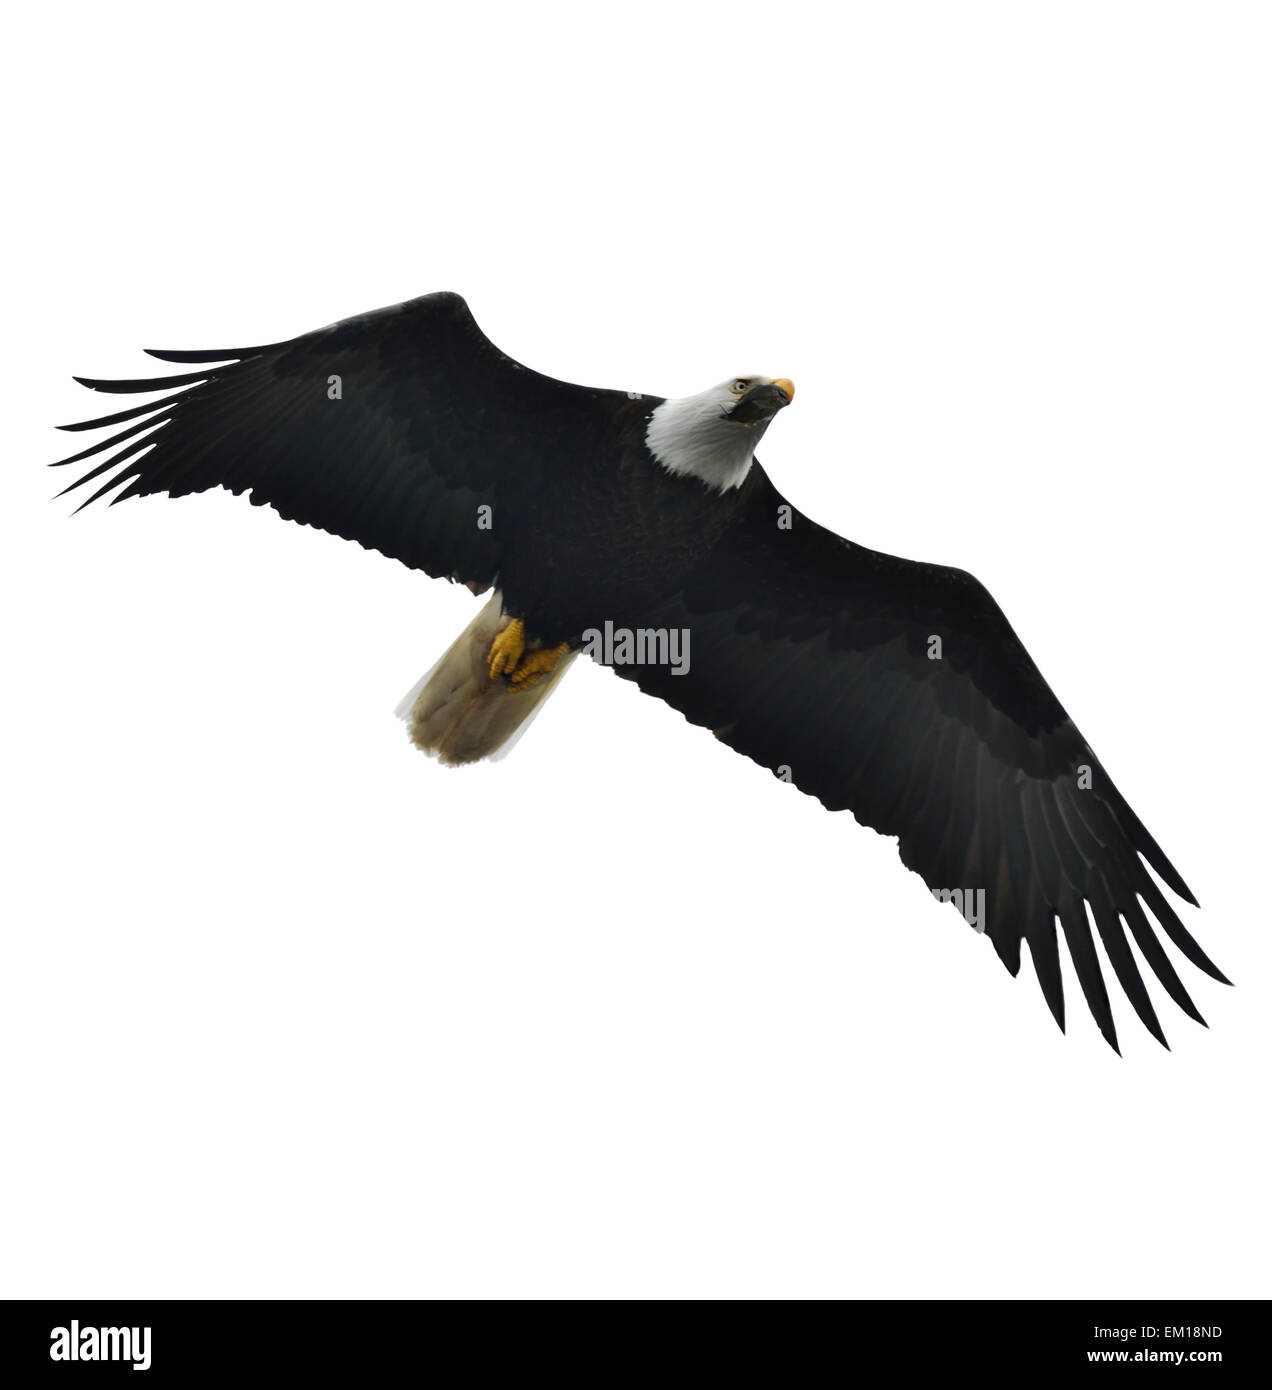 Soaring bald eagle Cut Out Stock Images & Pictures - Alamy